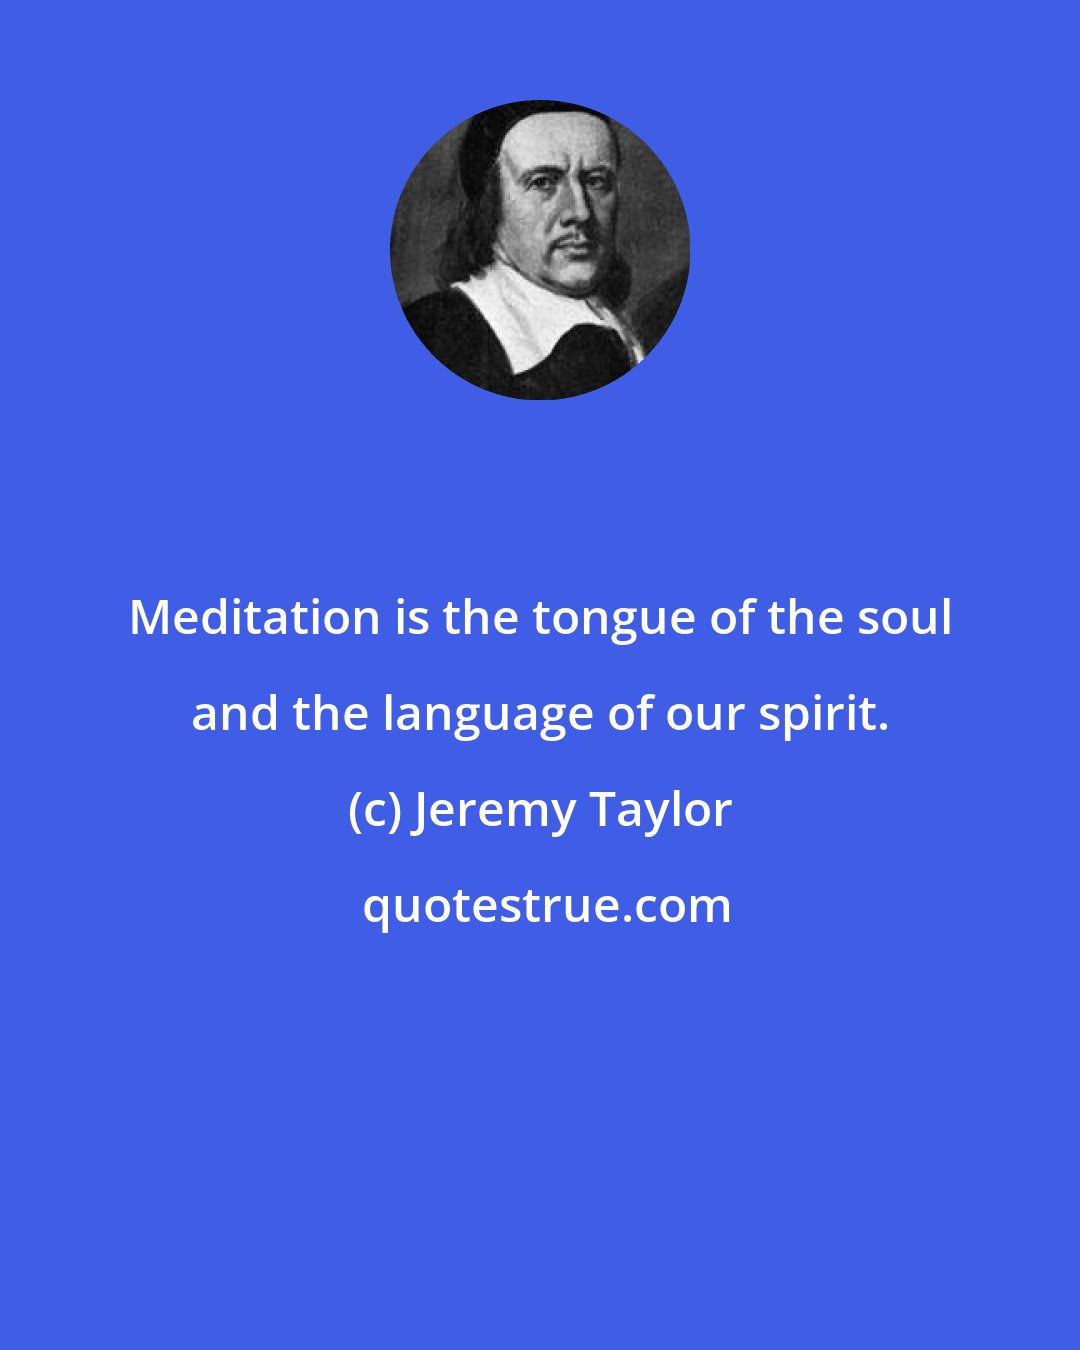 Jeremy Taylor: Meditation is the tongue of the soul and the language of our spirit.